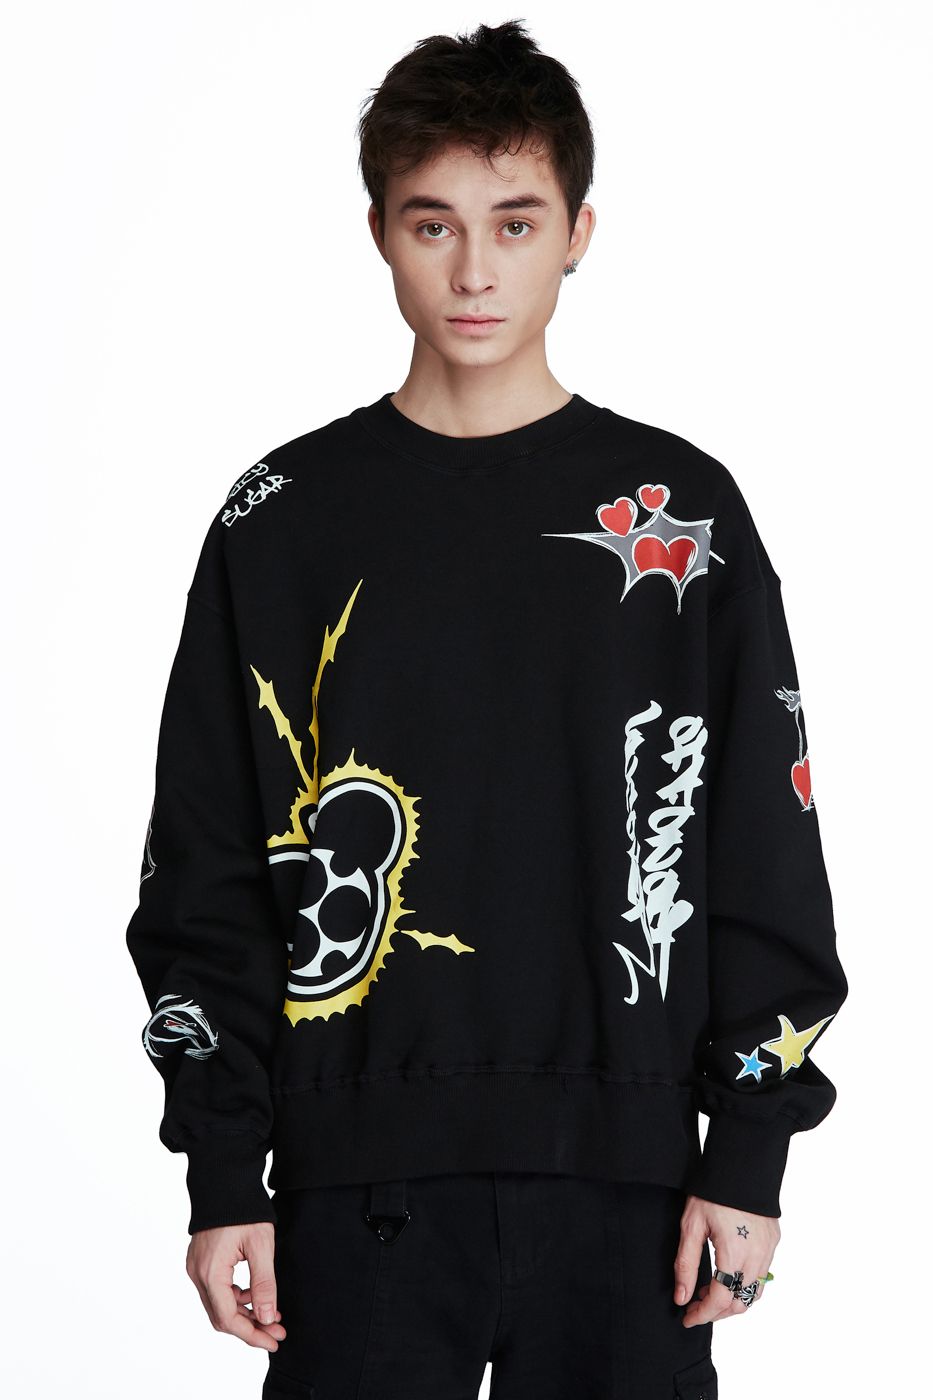  LICKED COLLAB SWEATER BLACK 